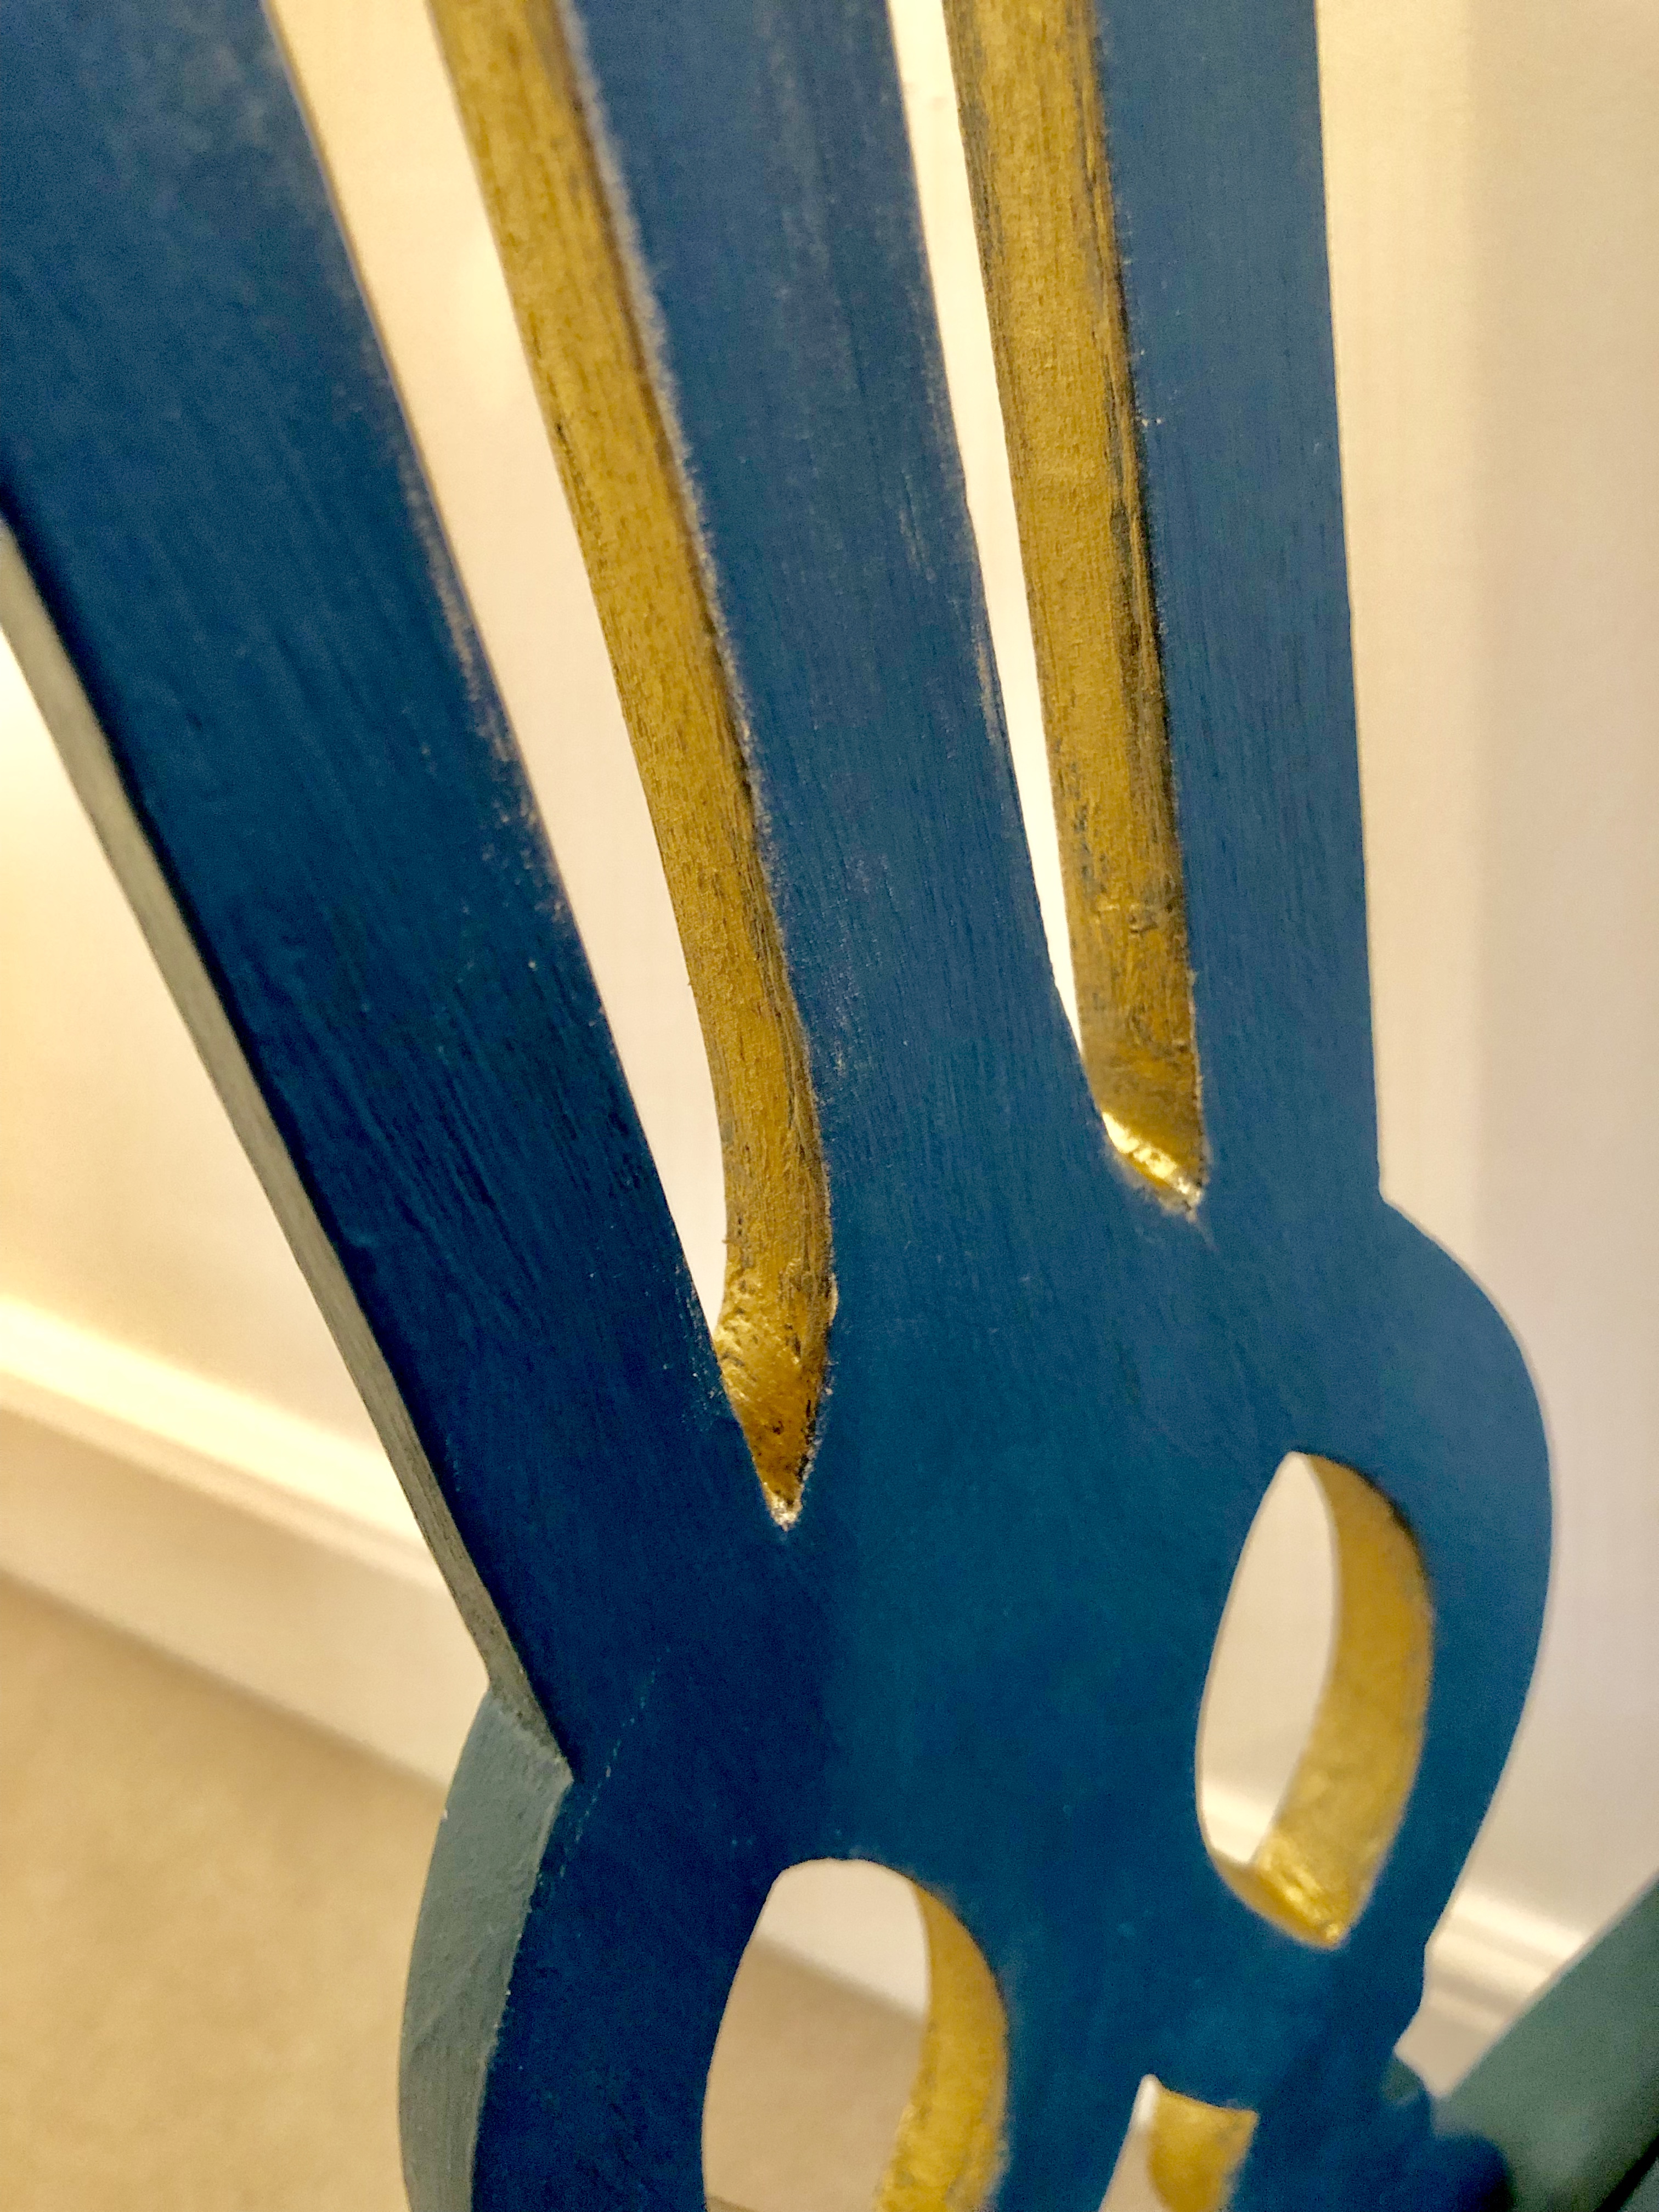 this morning gilding on chair